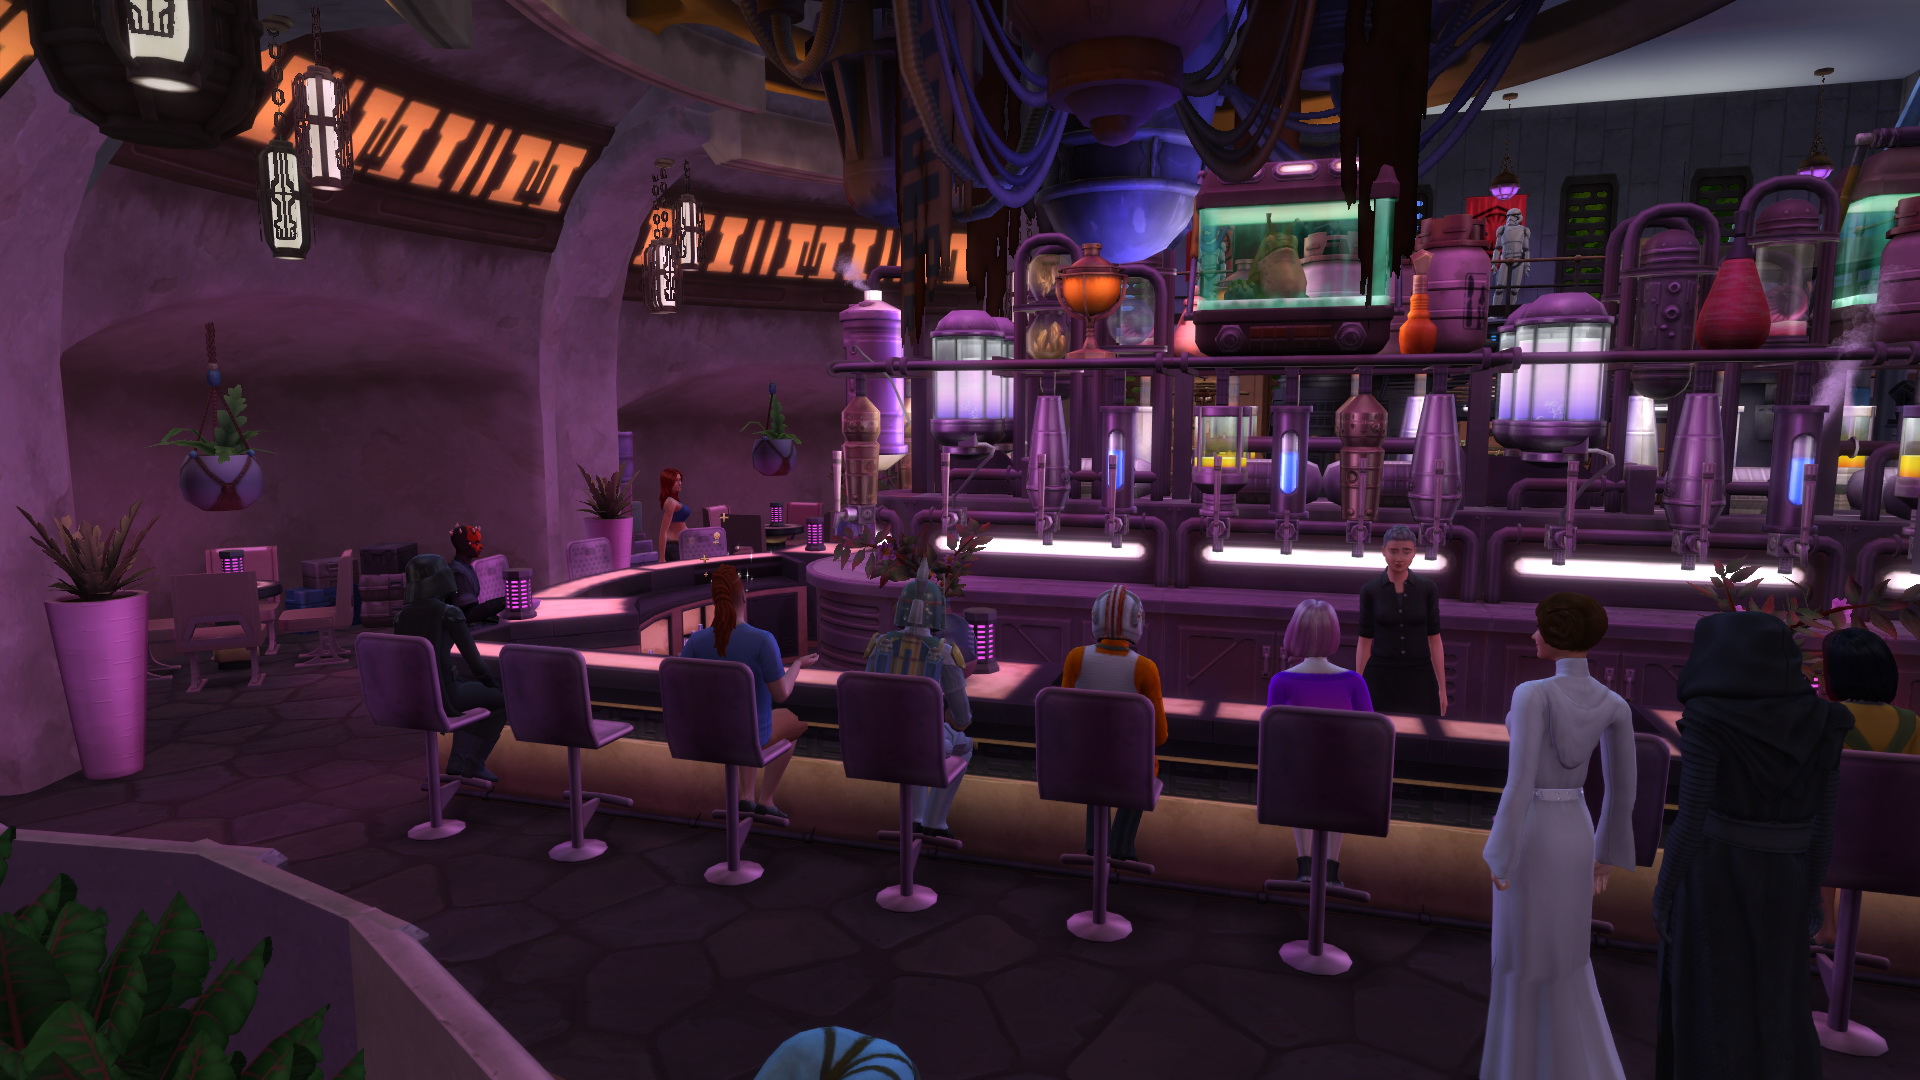 Sims 4 CC Houses and Lots: Star Wars Nightclub by bradybrad7 from Mod The S...